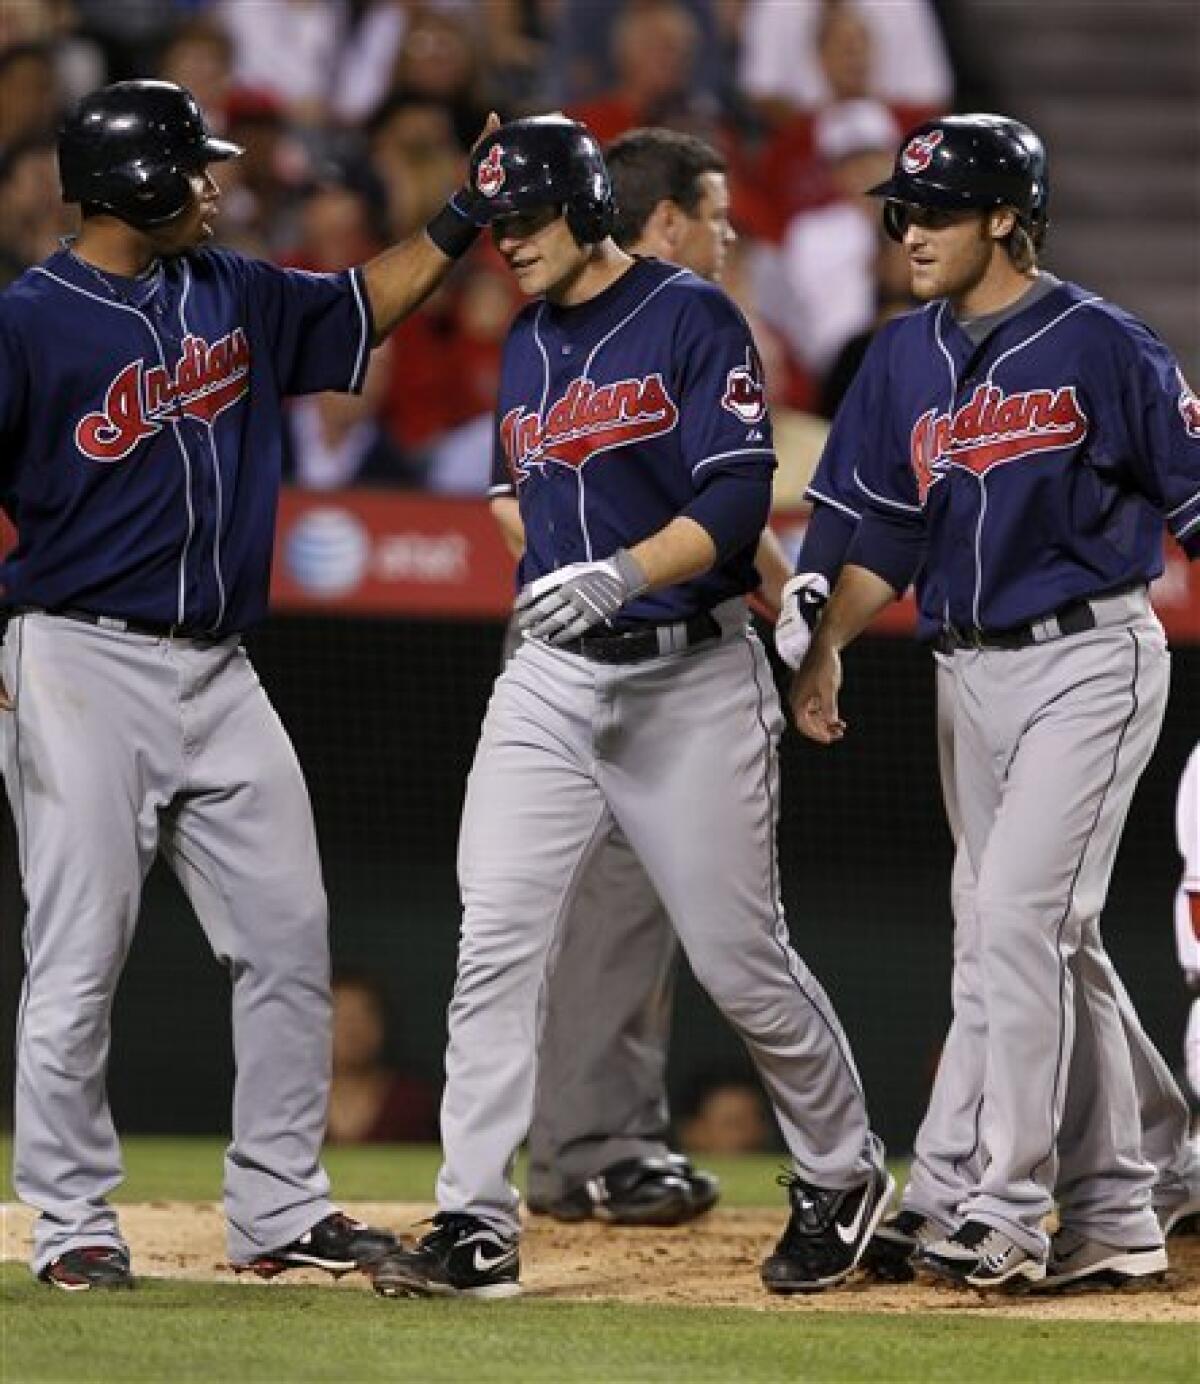 Cleveland Indians' Lou Marson, second from left, gets a pat on the head from Jordan Brown, left, after Marson hit a grand slam in the sixth inning of a baseball game against the Los Angeles Angels on Tuesday, Sept. 7, 2010, in Anaheim, Calif. (AP Photo/Alex Gallardo)